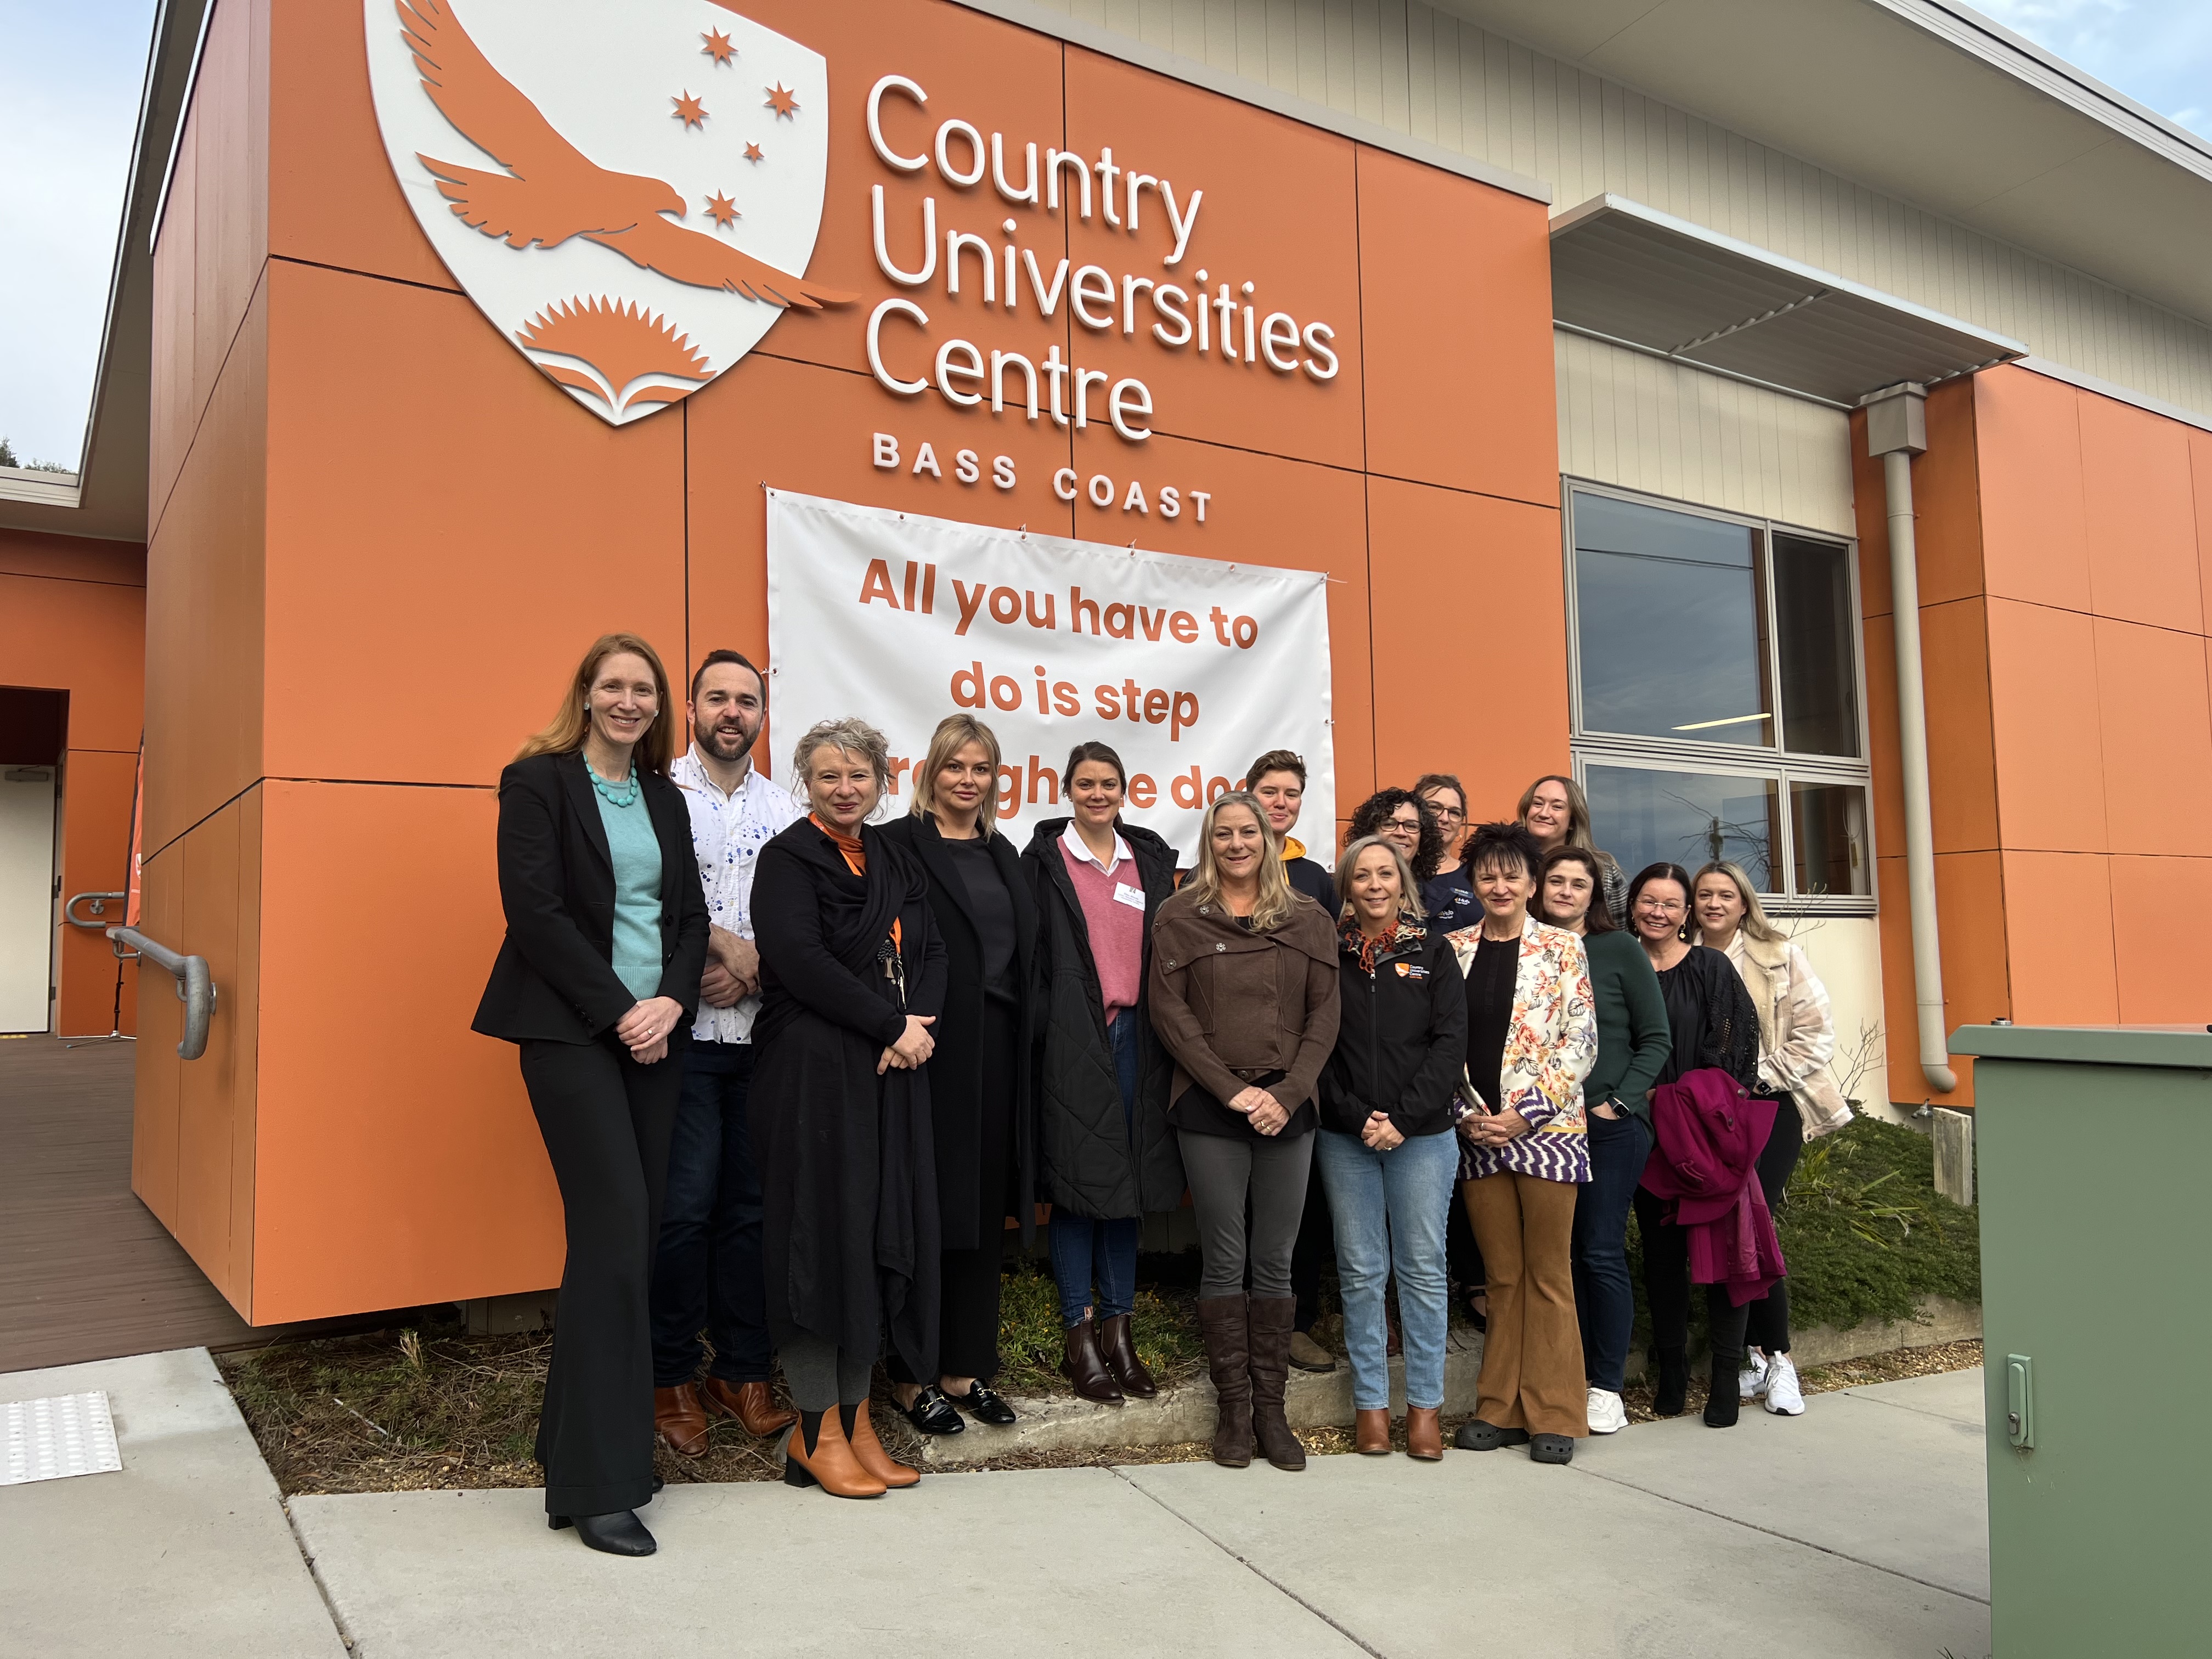 Country University Centre in Bass Coast, featuring from Left to Right and Back to Front Row: Kristie Van Omme, Chris Ronan, Andrea Evans McCall, Dan Keenan, Elise Woods, Amanda Davies, Katie Szabo, Jenni James, Cate Wuttke, Kim Gregory, Amma Buckley, Maryanne Tranter, Ashlee Jones, Peta MacRae and Emma Takai.